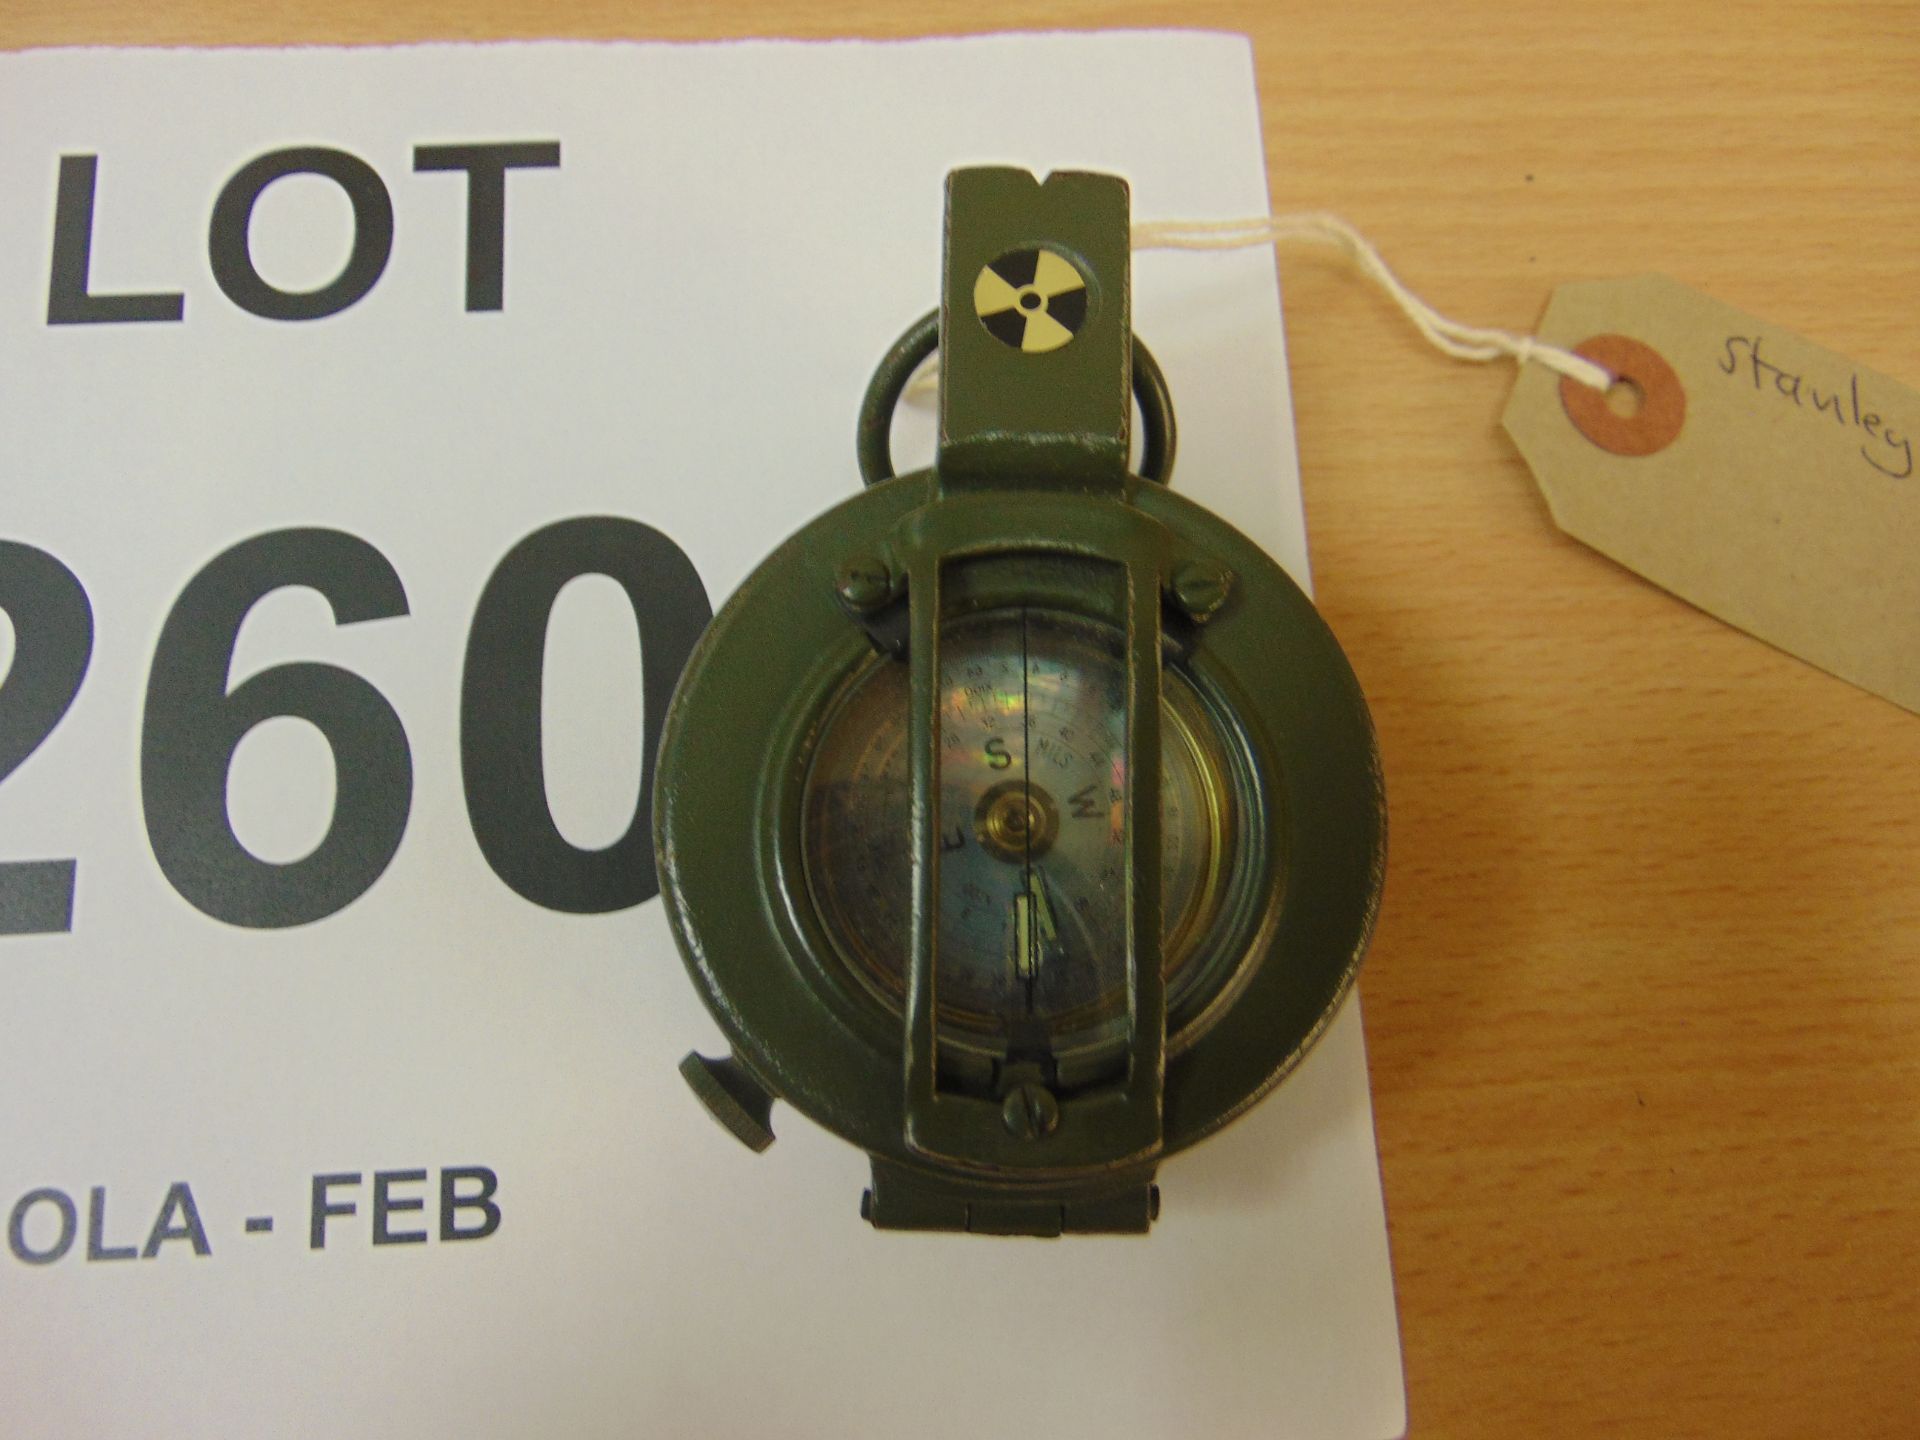 Stanley London Brass Prismatic Compass, British Army Issue Nato marks